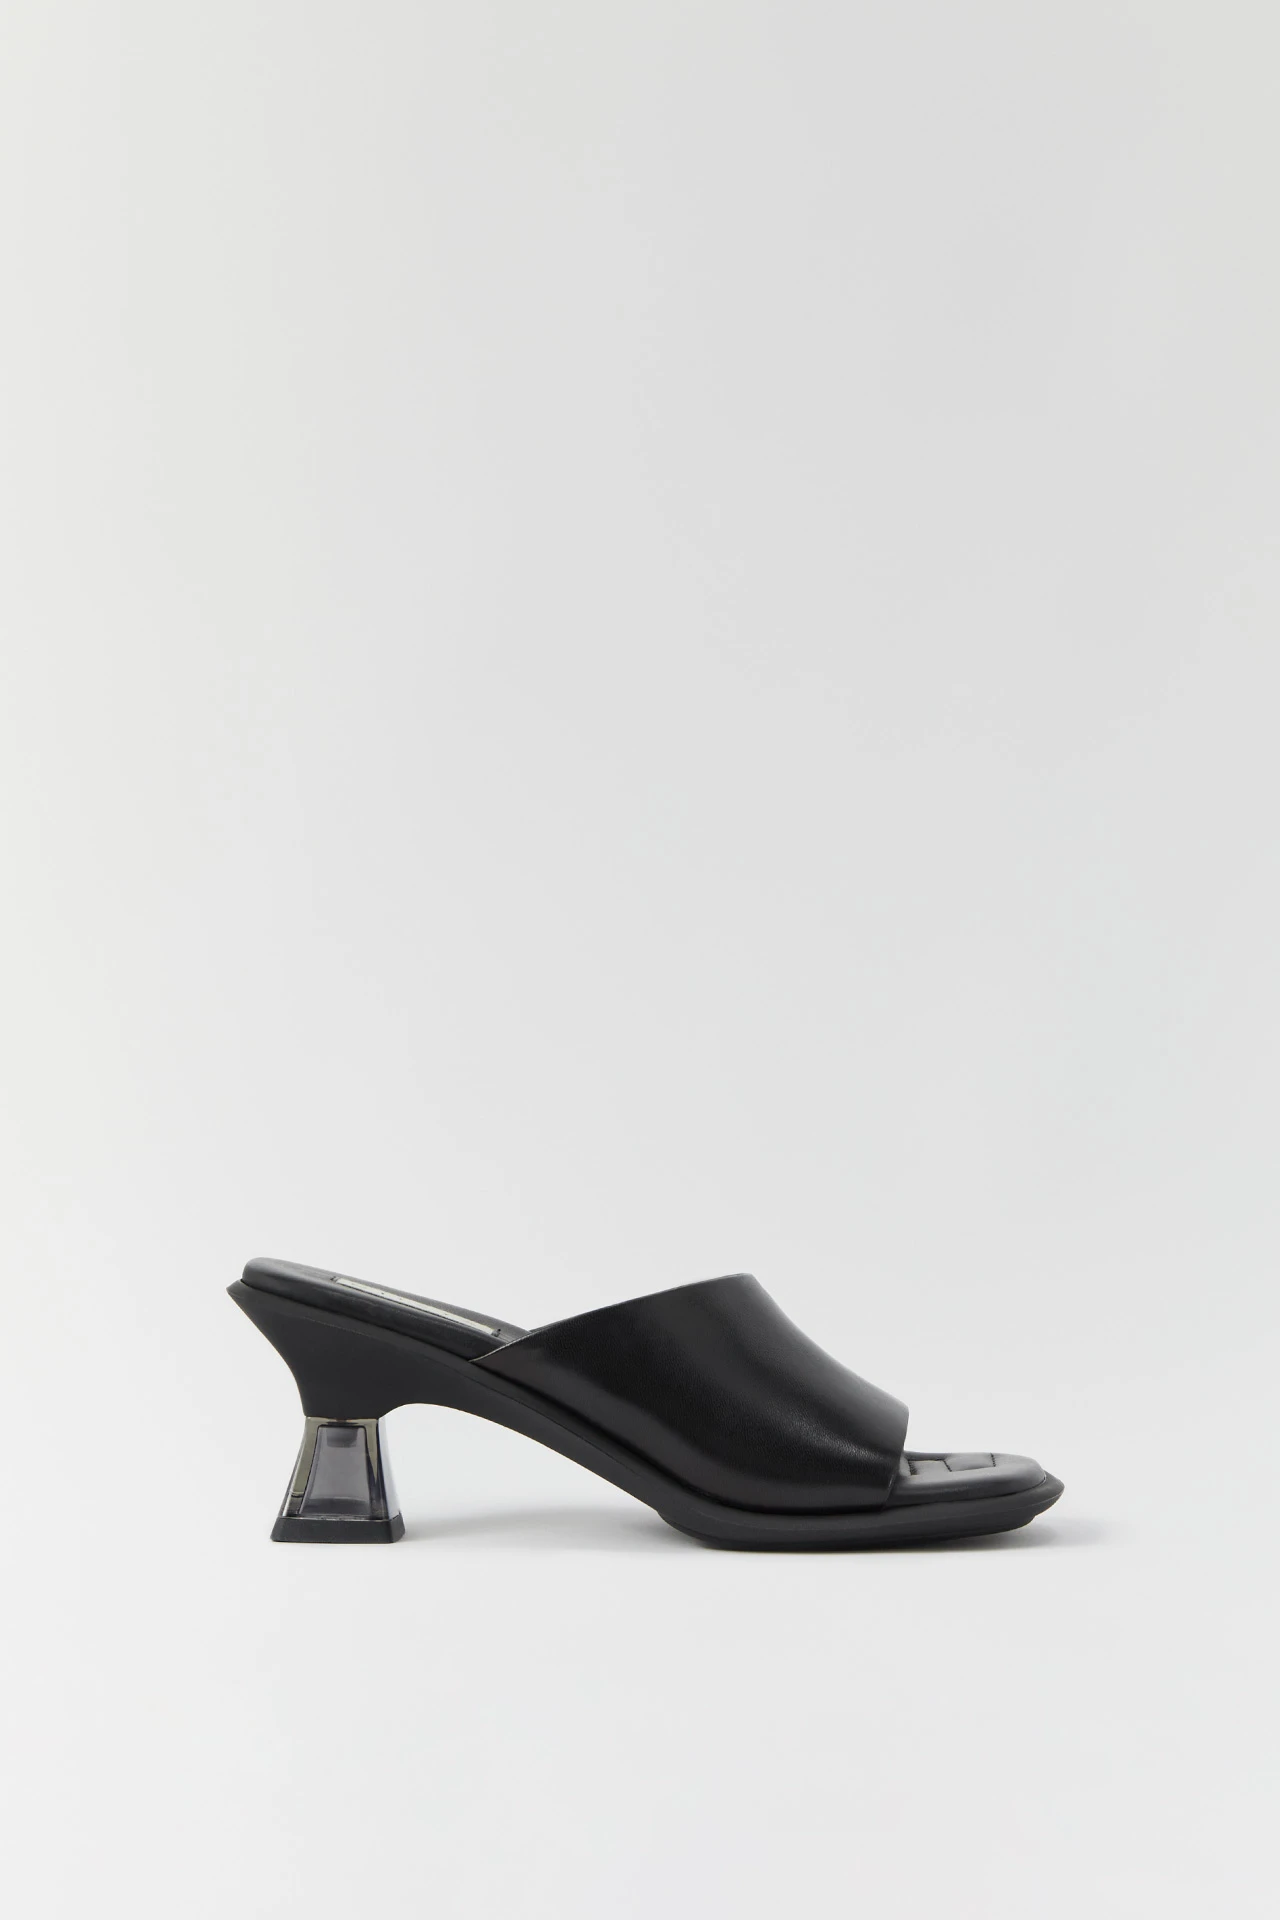 Synthia Black Sandals | Miista Europe | Made in Portugal